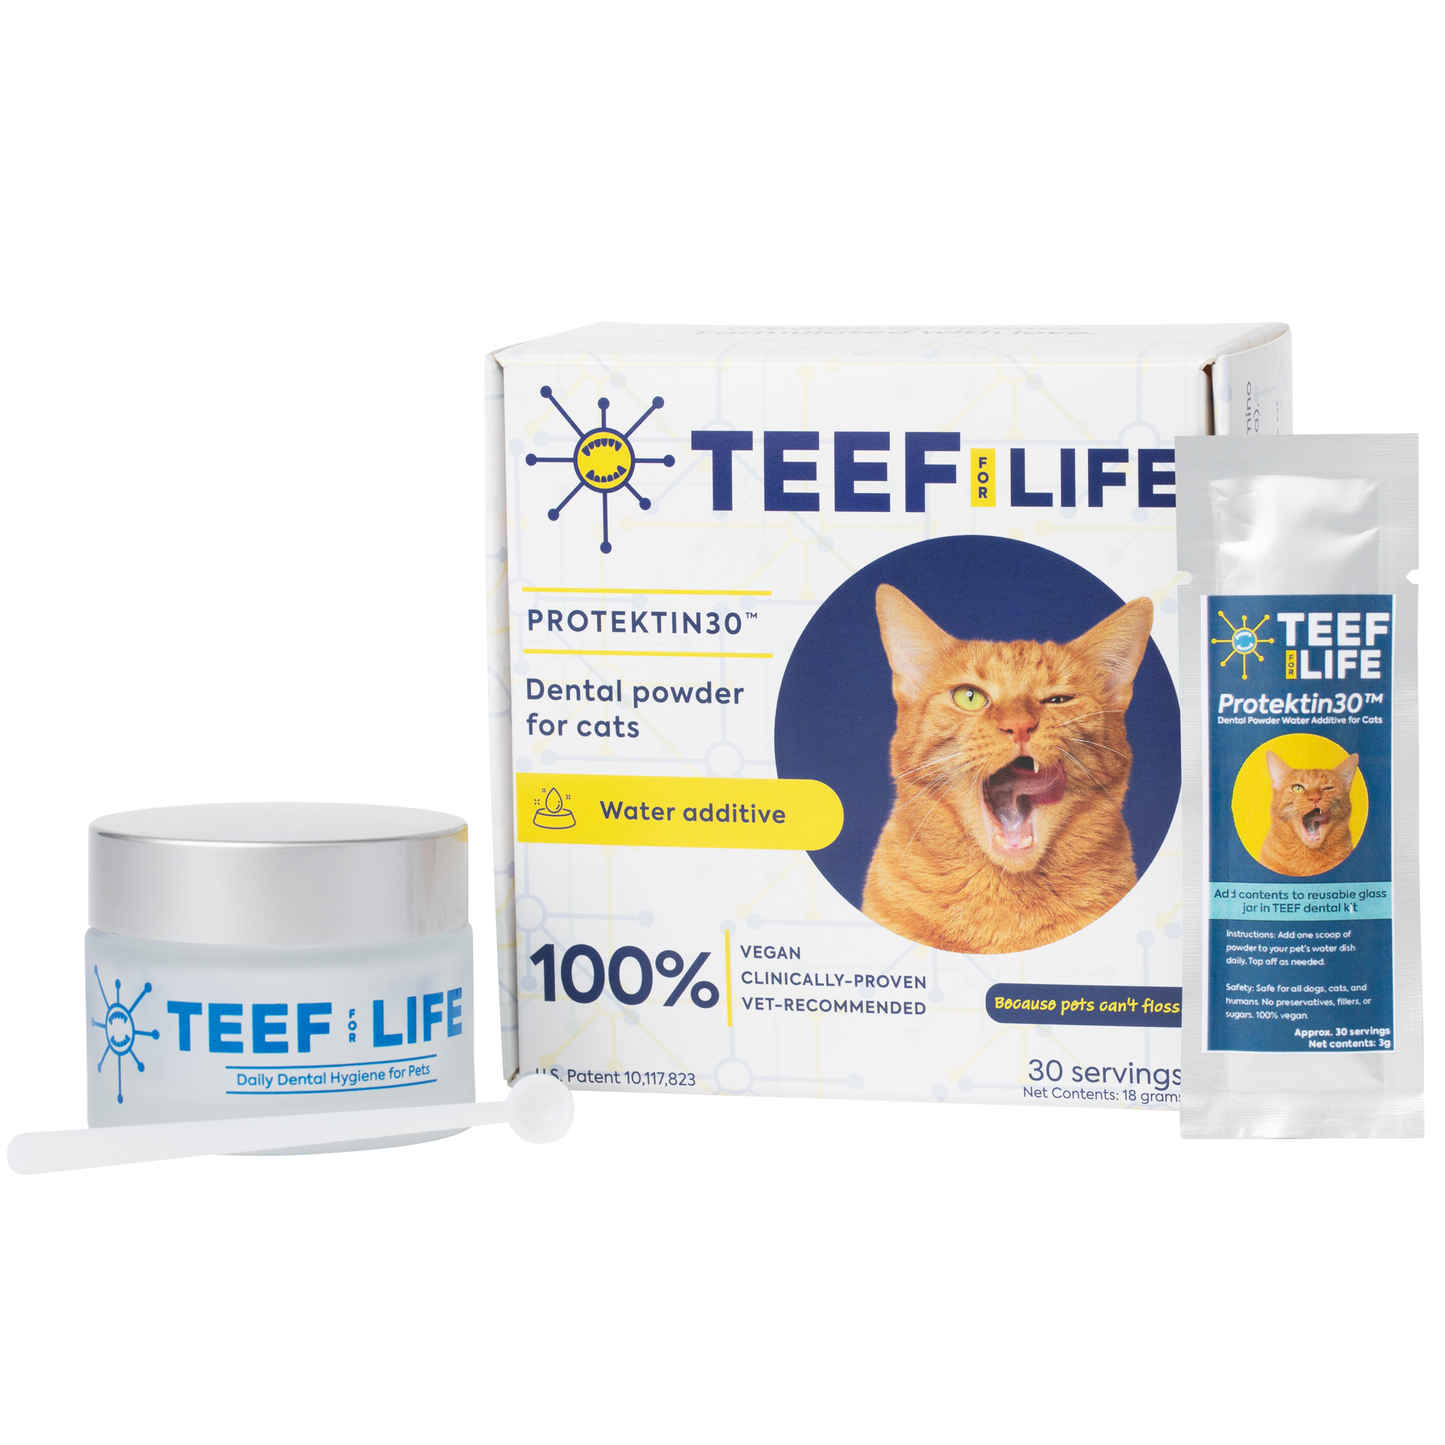 TEEF for Life - Protektin30™ - Dental Kit: Powder water additive for cats